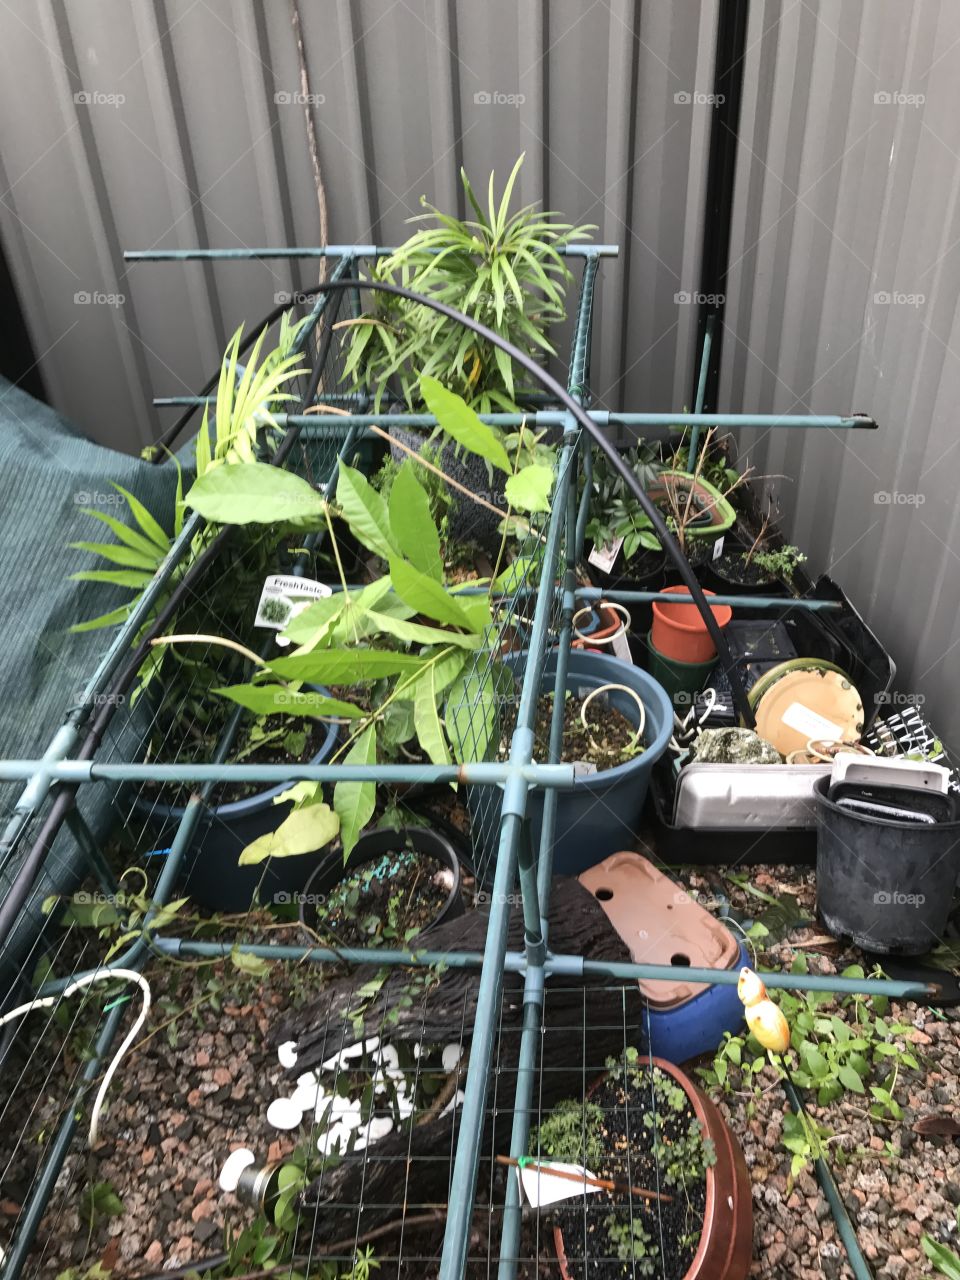 This is a picture of my greenhouse after Tropical Cyclone Debbie. It was really devastating seeing the aftermath of the cyclone. I was very lucky, as it was only my greenhouse that suffered.